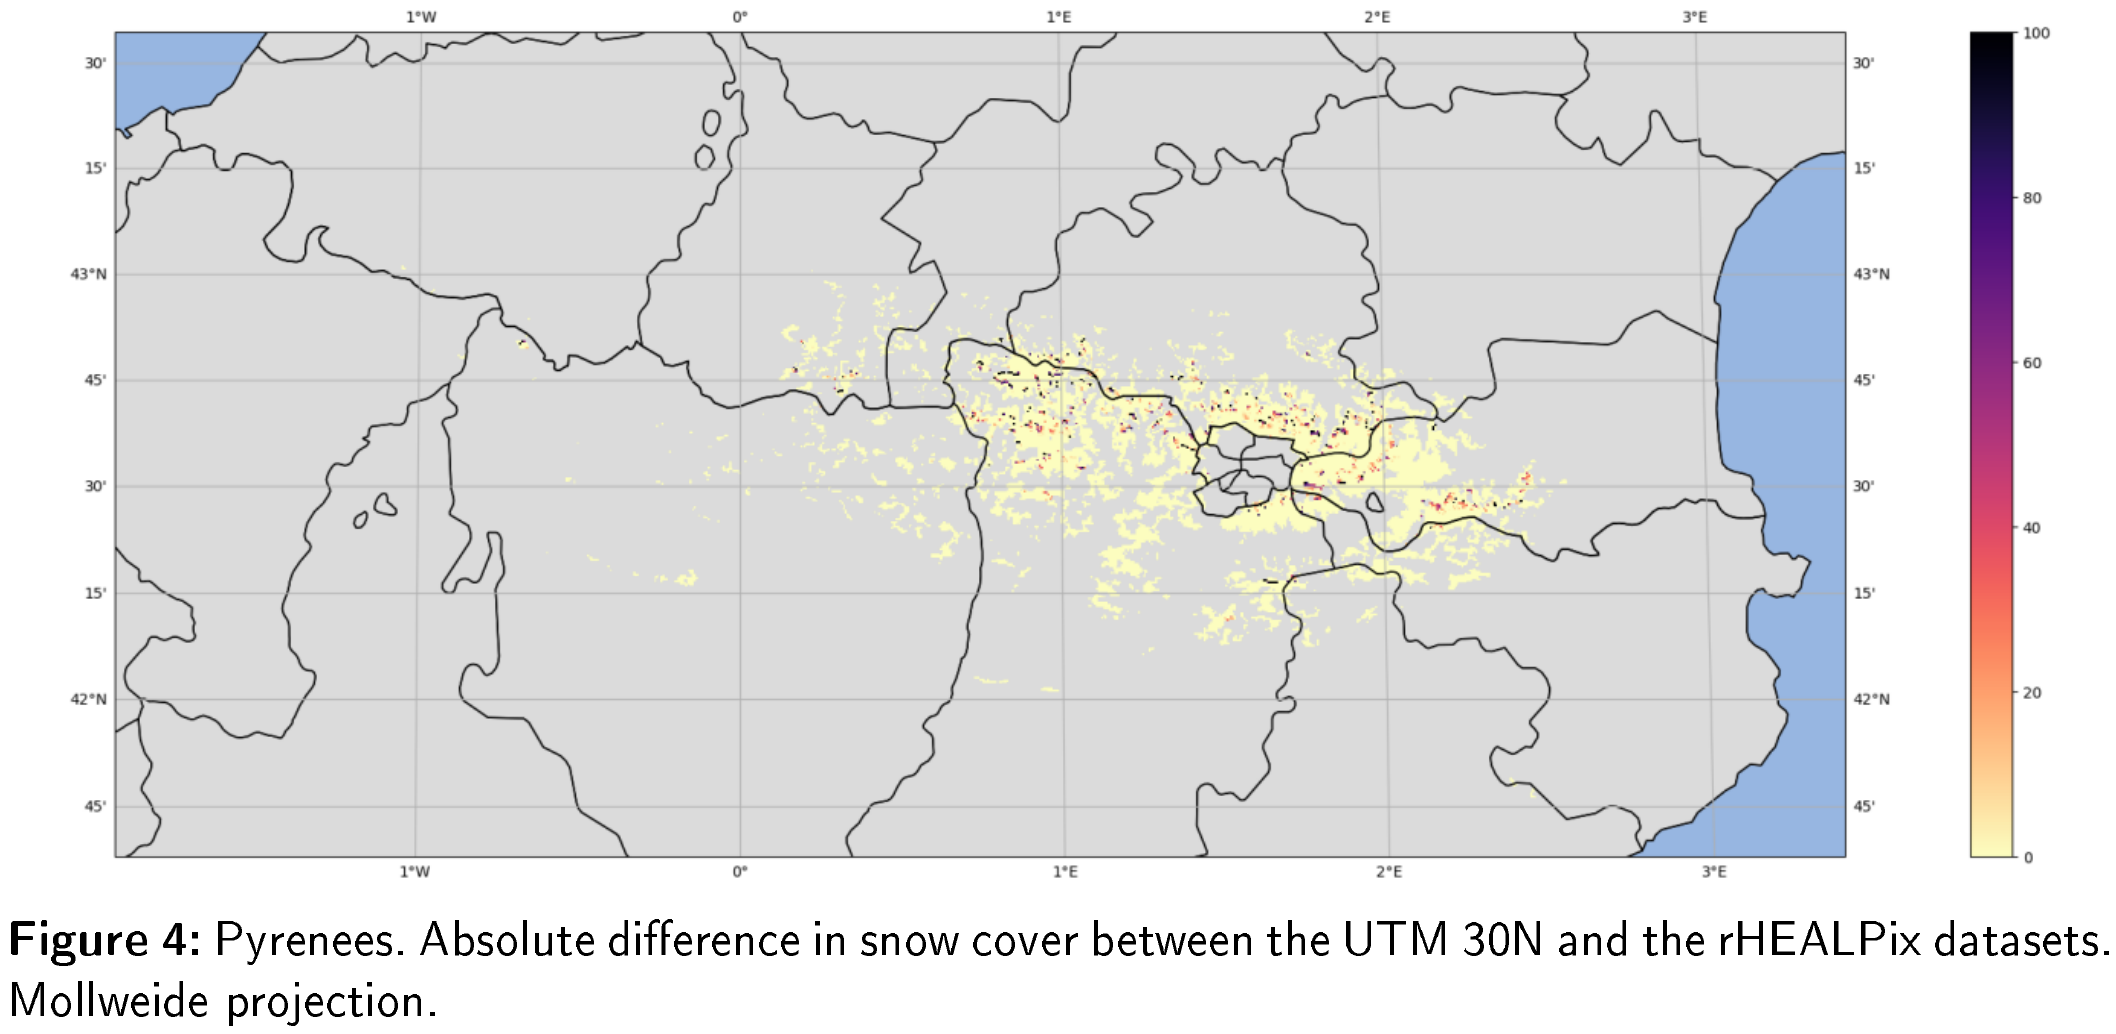 Figure 4: Pyrenees. Absolute difference in snow cover between the UTM 30N and the rHEALPix datasets. Mollweide projection.